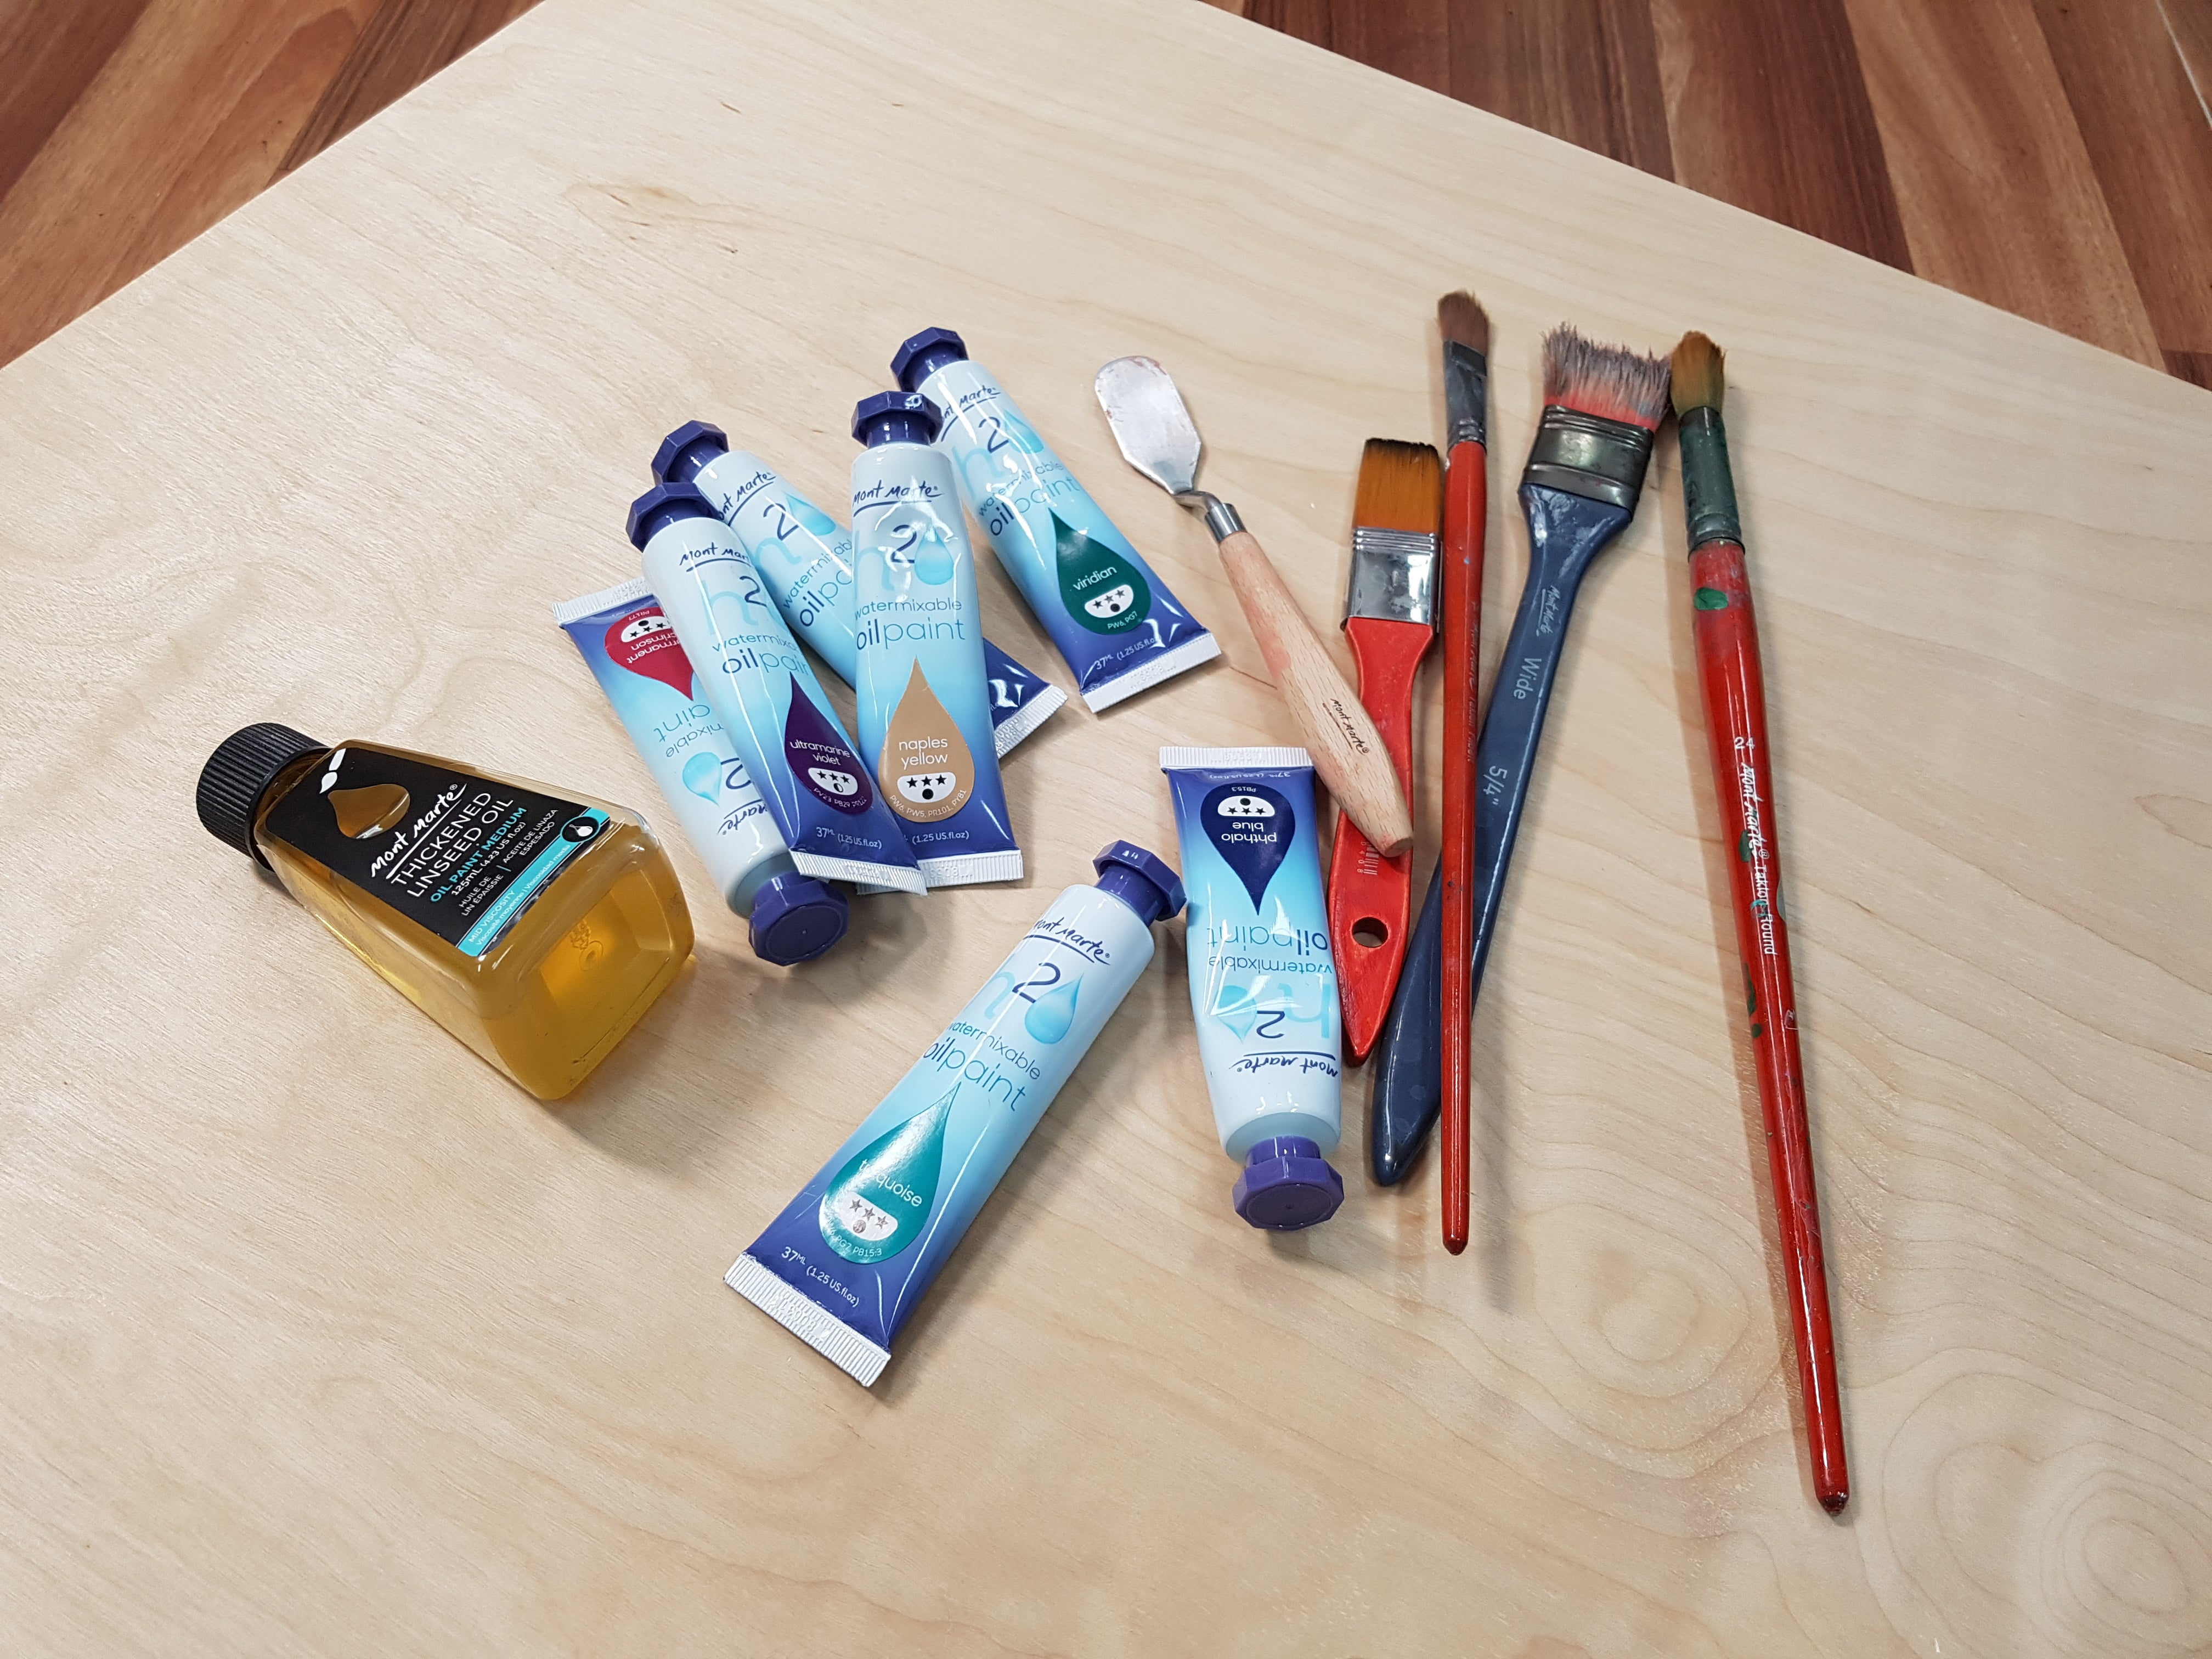 Pile of painting supplies on a timber desk.